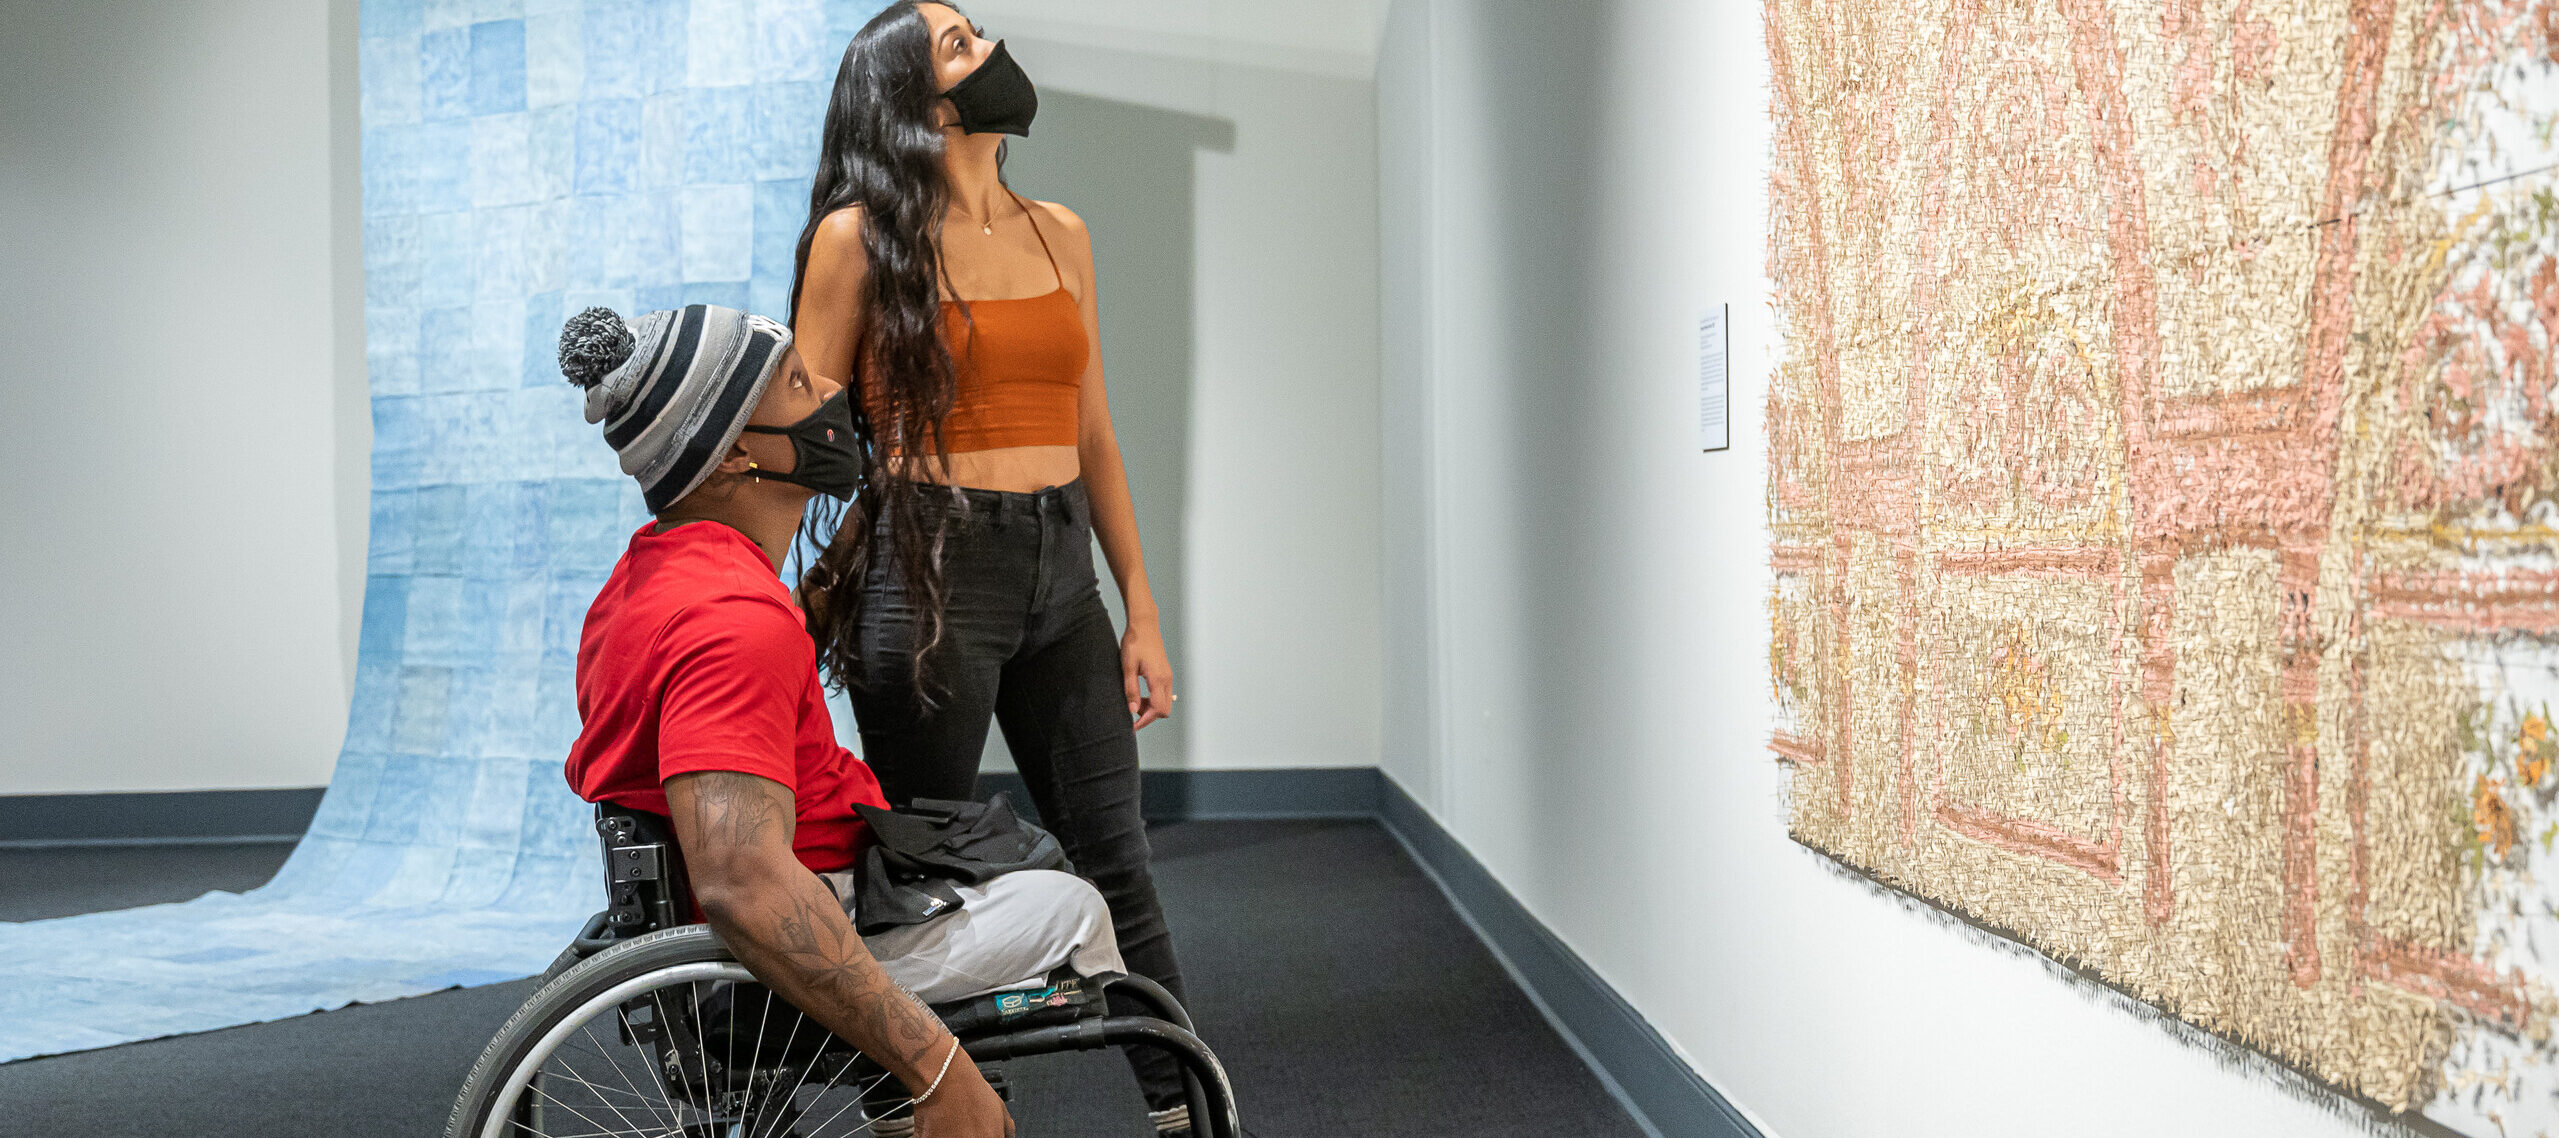 Two people look up at a large peach, tan, and ivory art installation in a gallery. The person with medium skin tone and tattoos on their right arm sits in a wheelchair and wears a red t-shirt, gray pants, gray-and-black striped winter hat, and black face mask. A person with medium skin tone, long curly black hair stands behind, wearing a burnt orange tank top, black jeans, and a black face mask. A large checkered blue artwork unfolds onto the gallery floor behind the pair.